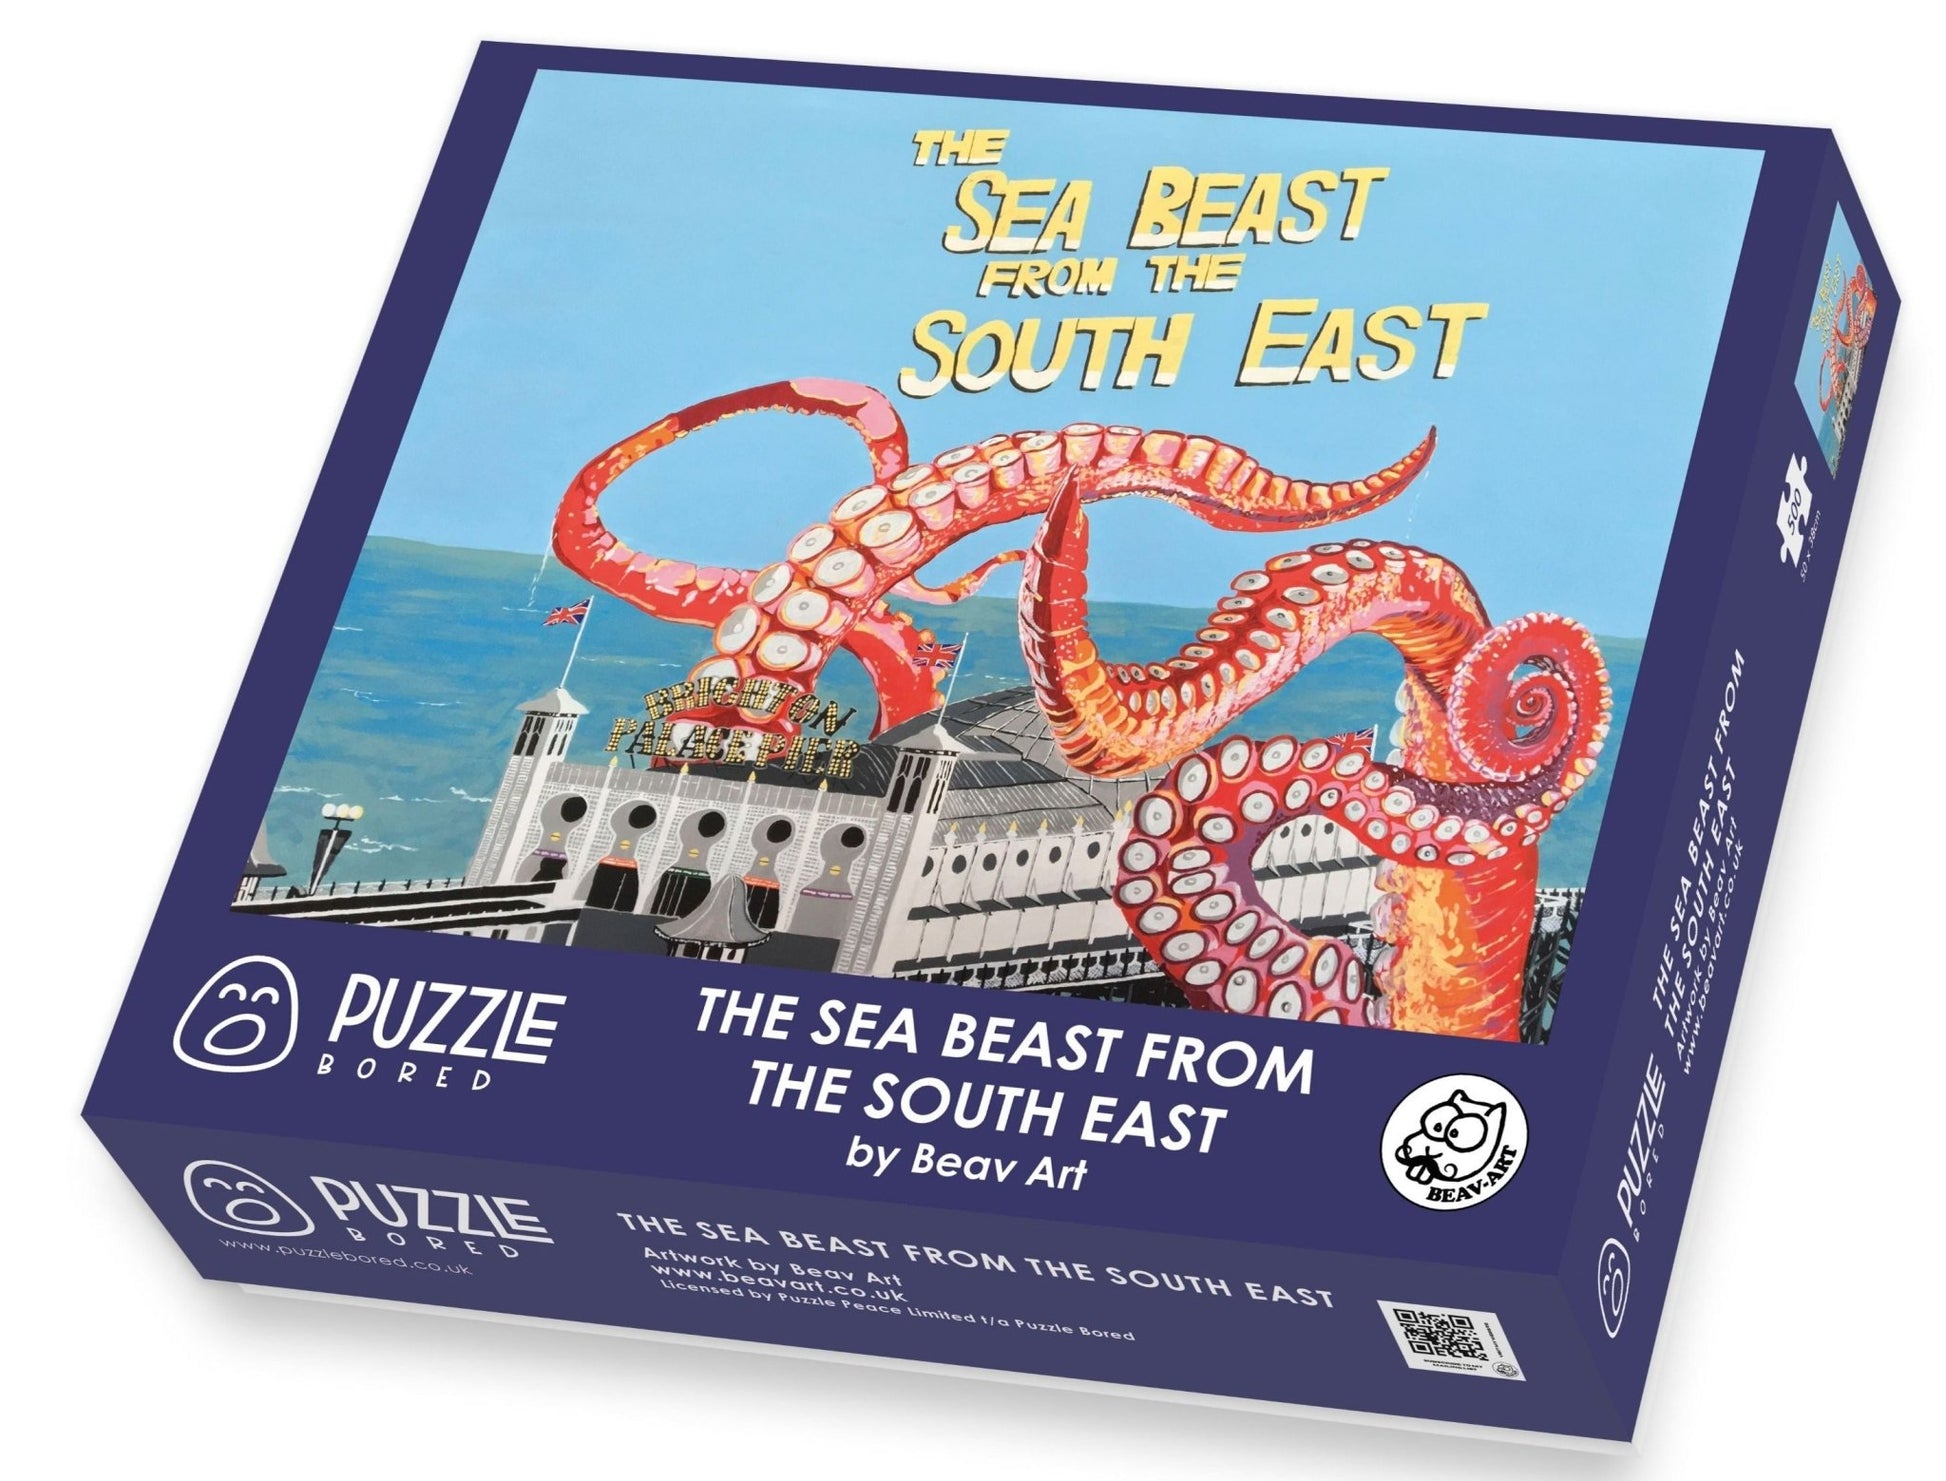 The Sea Beast from the South East by Beav Art - Puzzle Bored